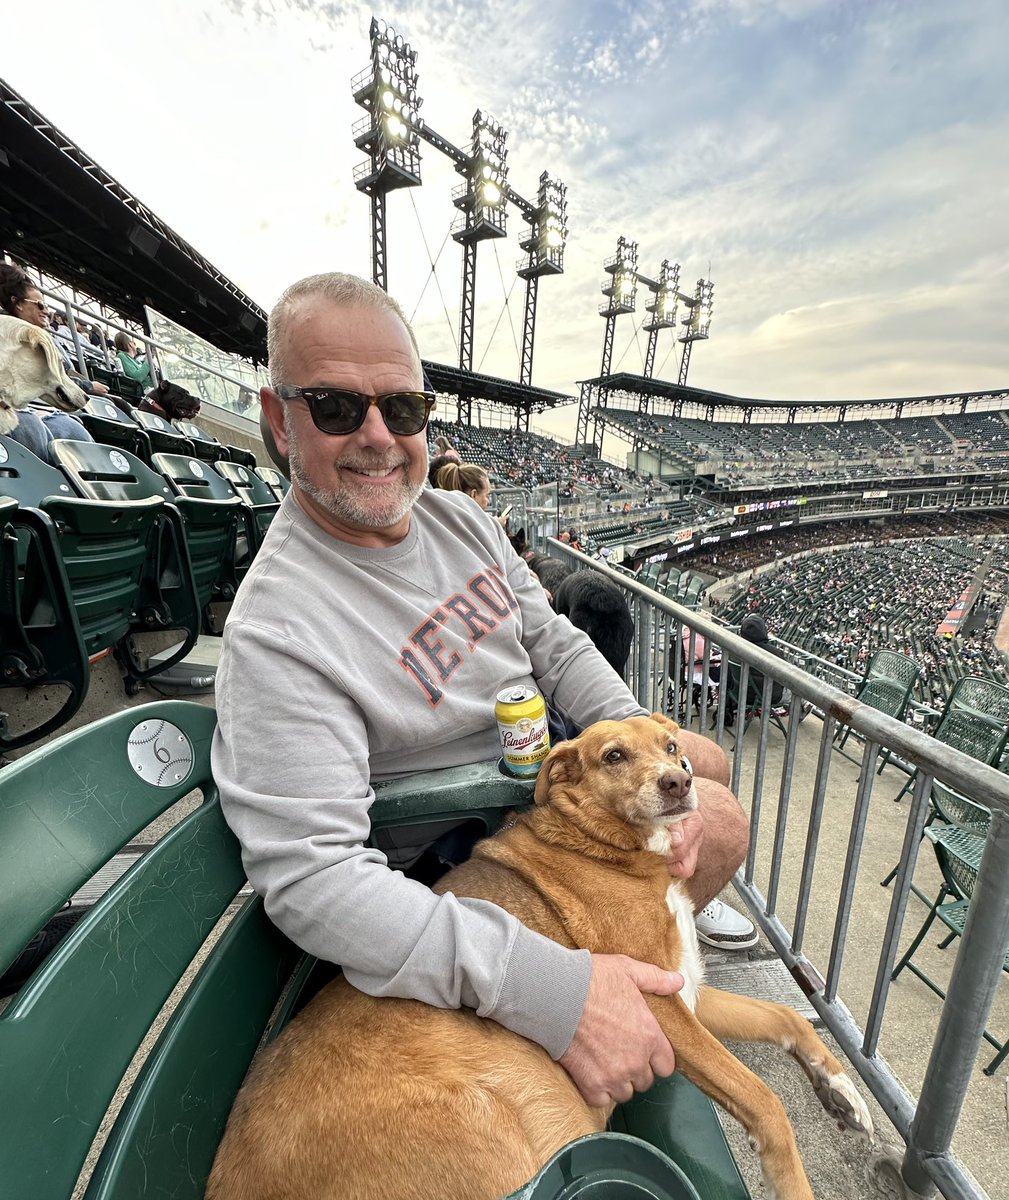 Just chilling at Comerica Park! Let’s go #Tigers!! #BarkinthePark 
#RepDetroit